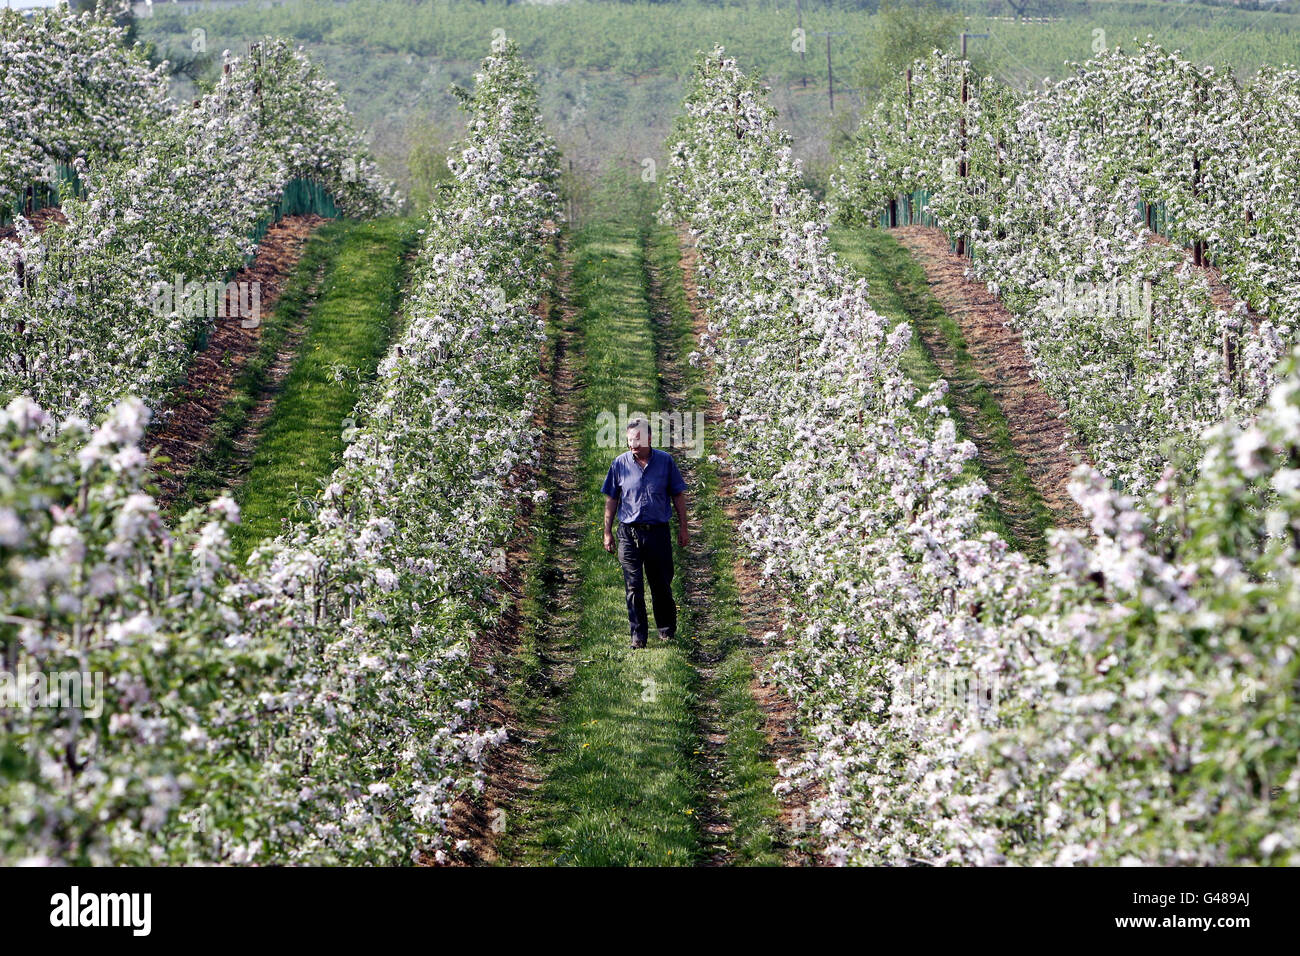 Apple blossom which has appeared 3 weeks earlier than usual is checked by fruit farmer John Bentley at Castle Fruit Farm, Newent, Gloucestershire. Stock Photo